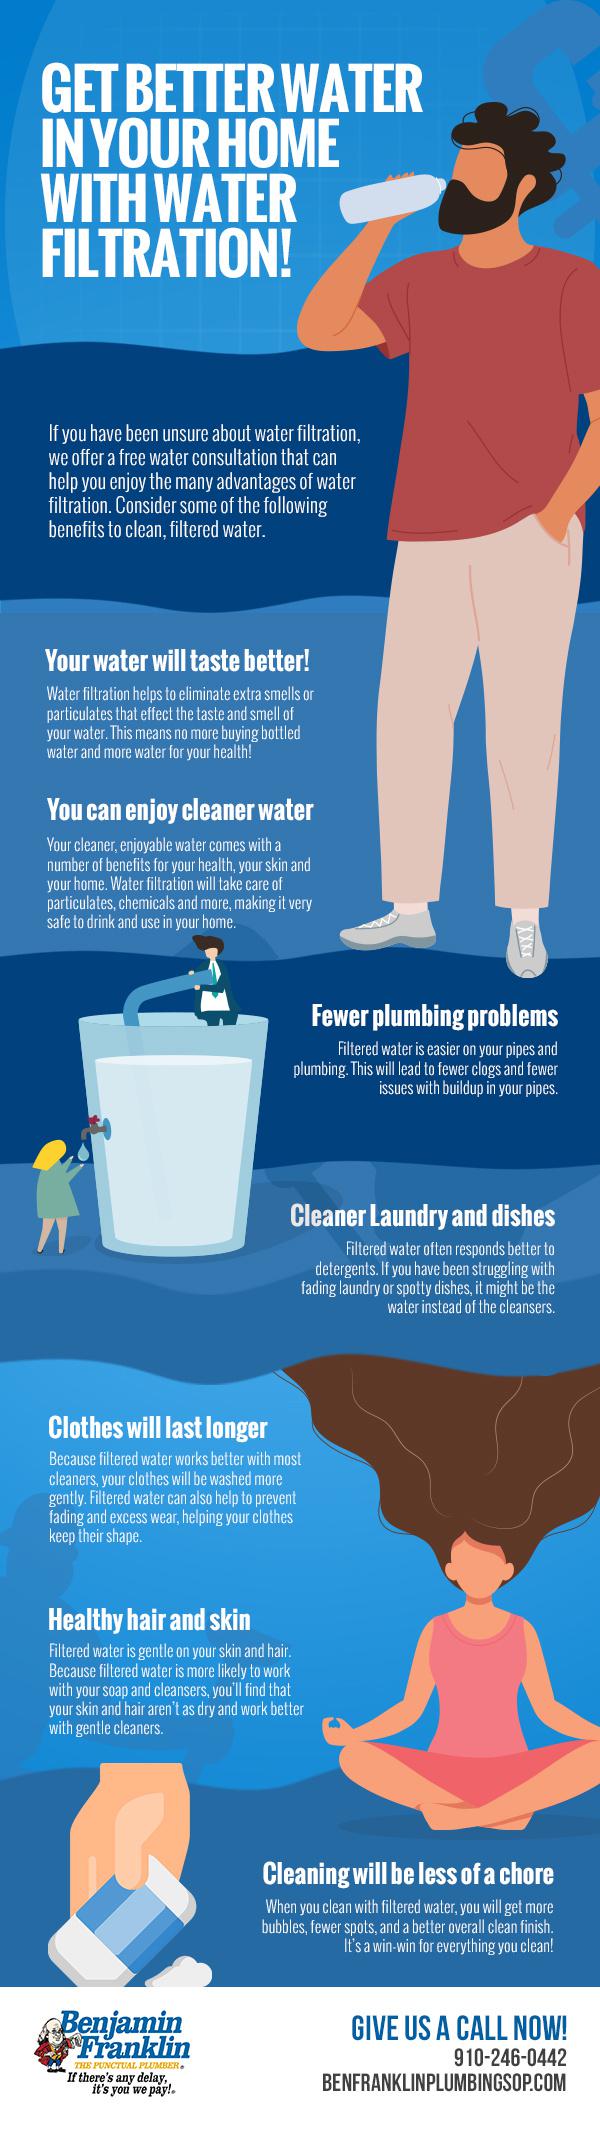 Get Better Water in Your Home with Water Filtration!